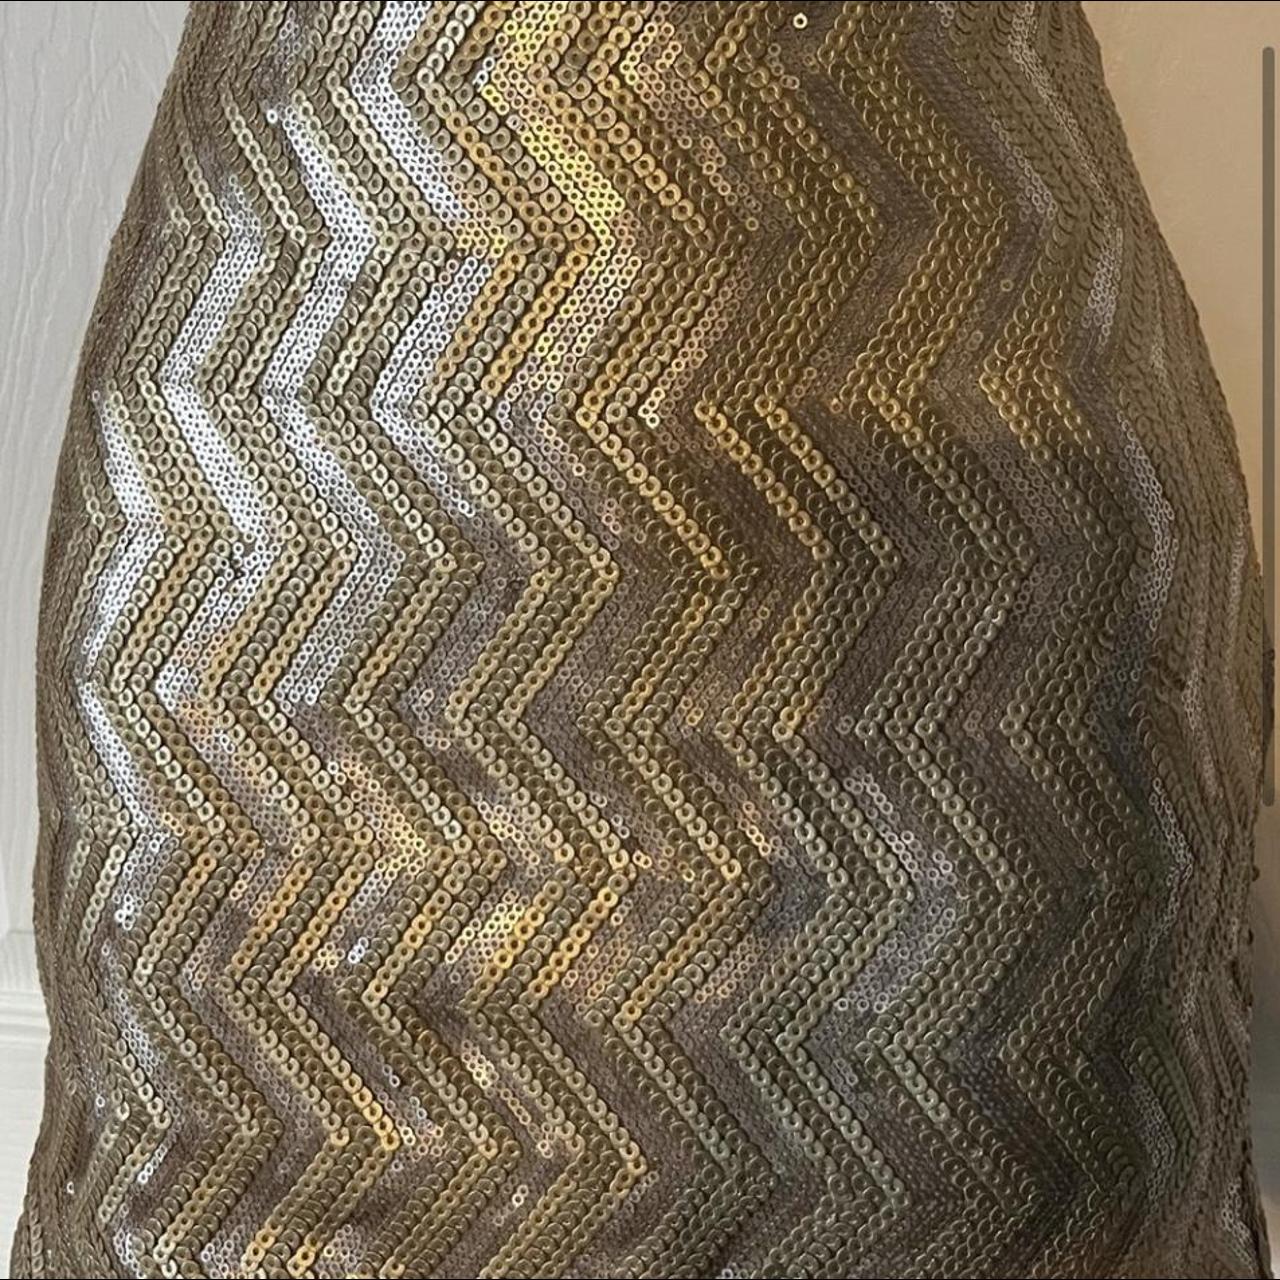 Product Image 2 - Gold sequined skirt. Size small.
Fully